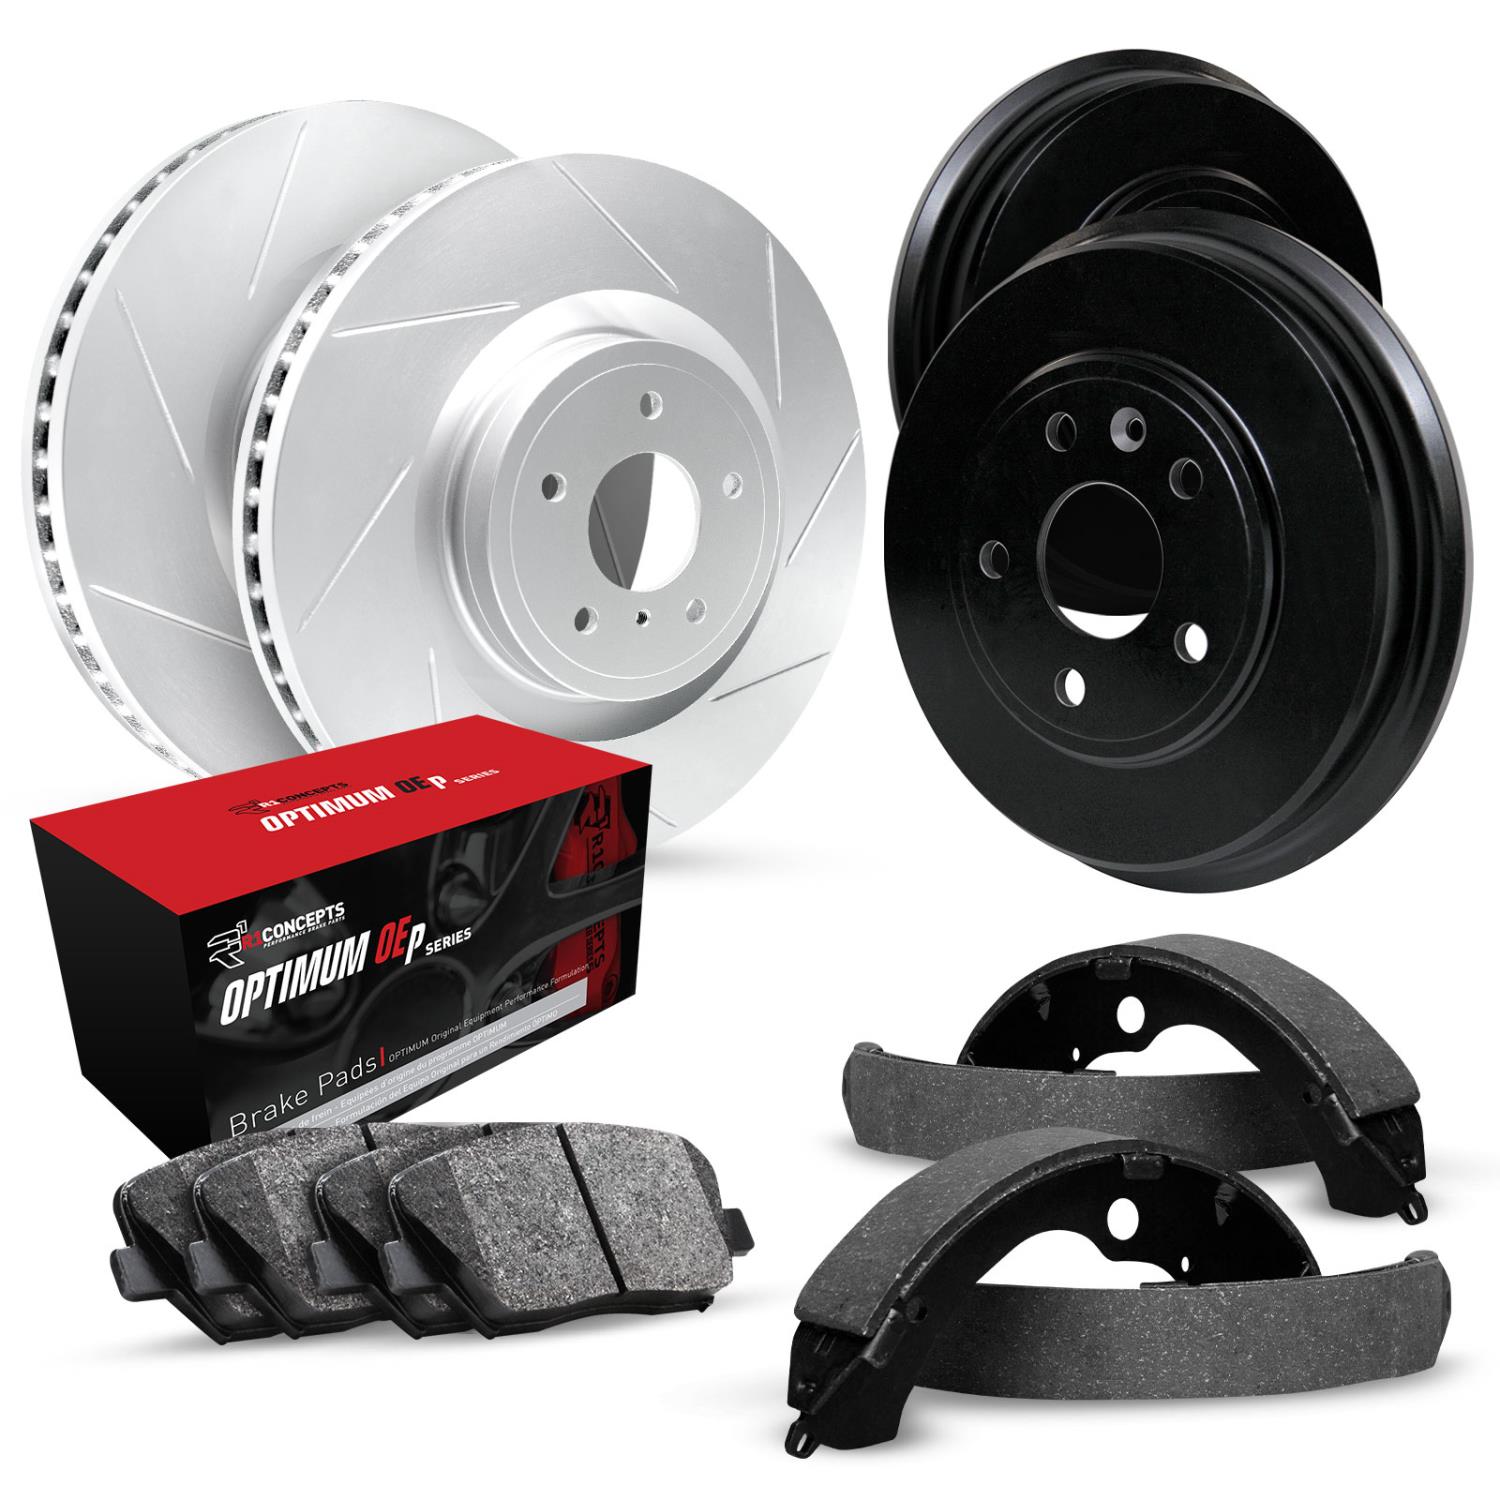 GEO-Carbon Slotted Brake Rotor & Drum Set w/Optimum OE Pads & Shoes, 1997-2001 Subaru, Position: Front & Rear